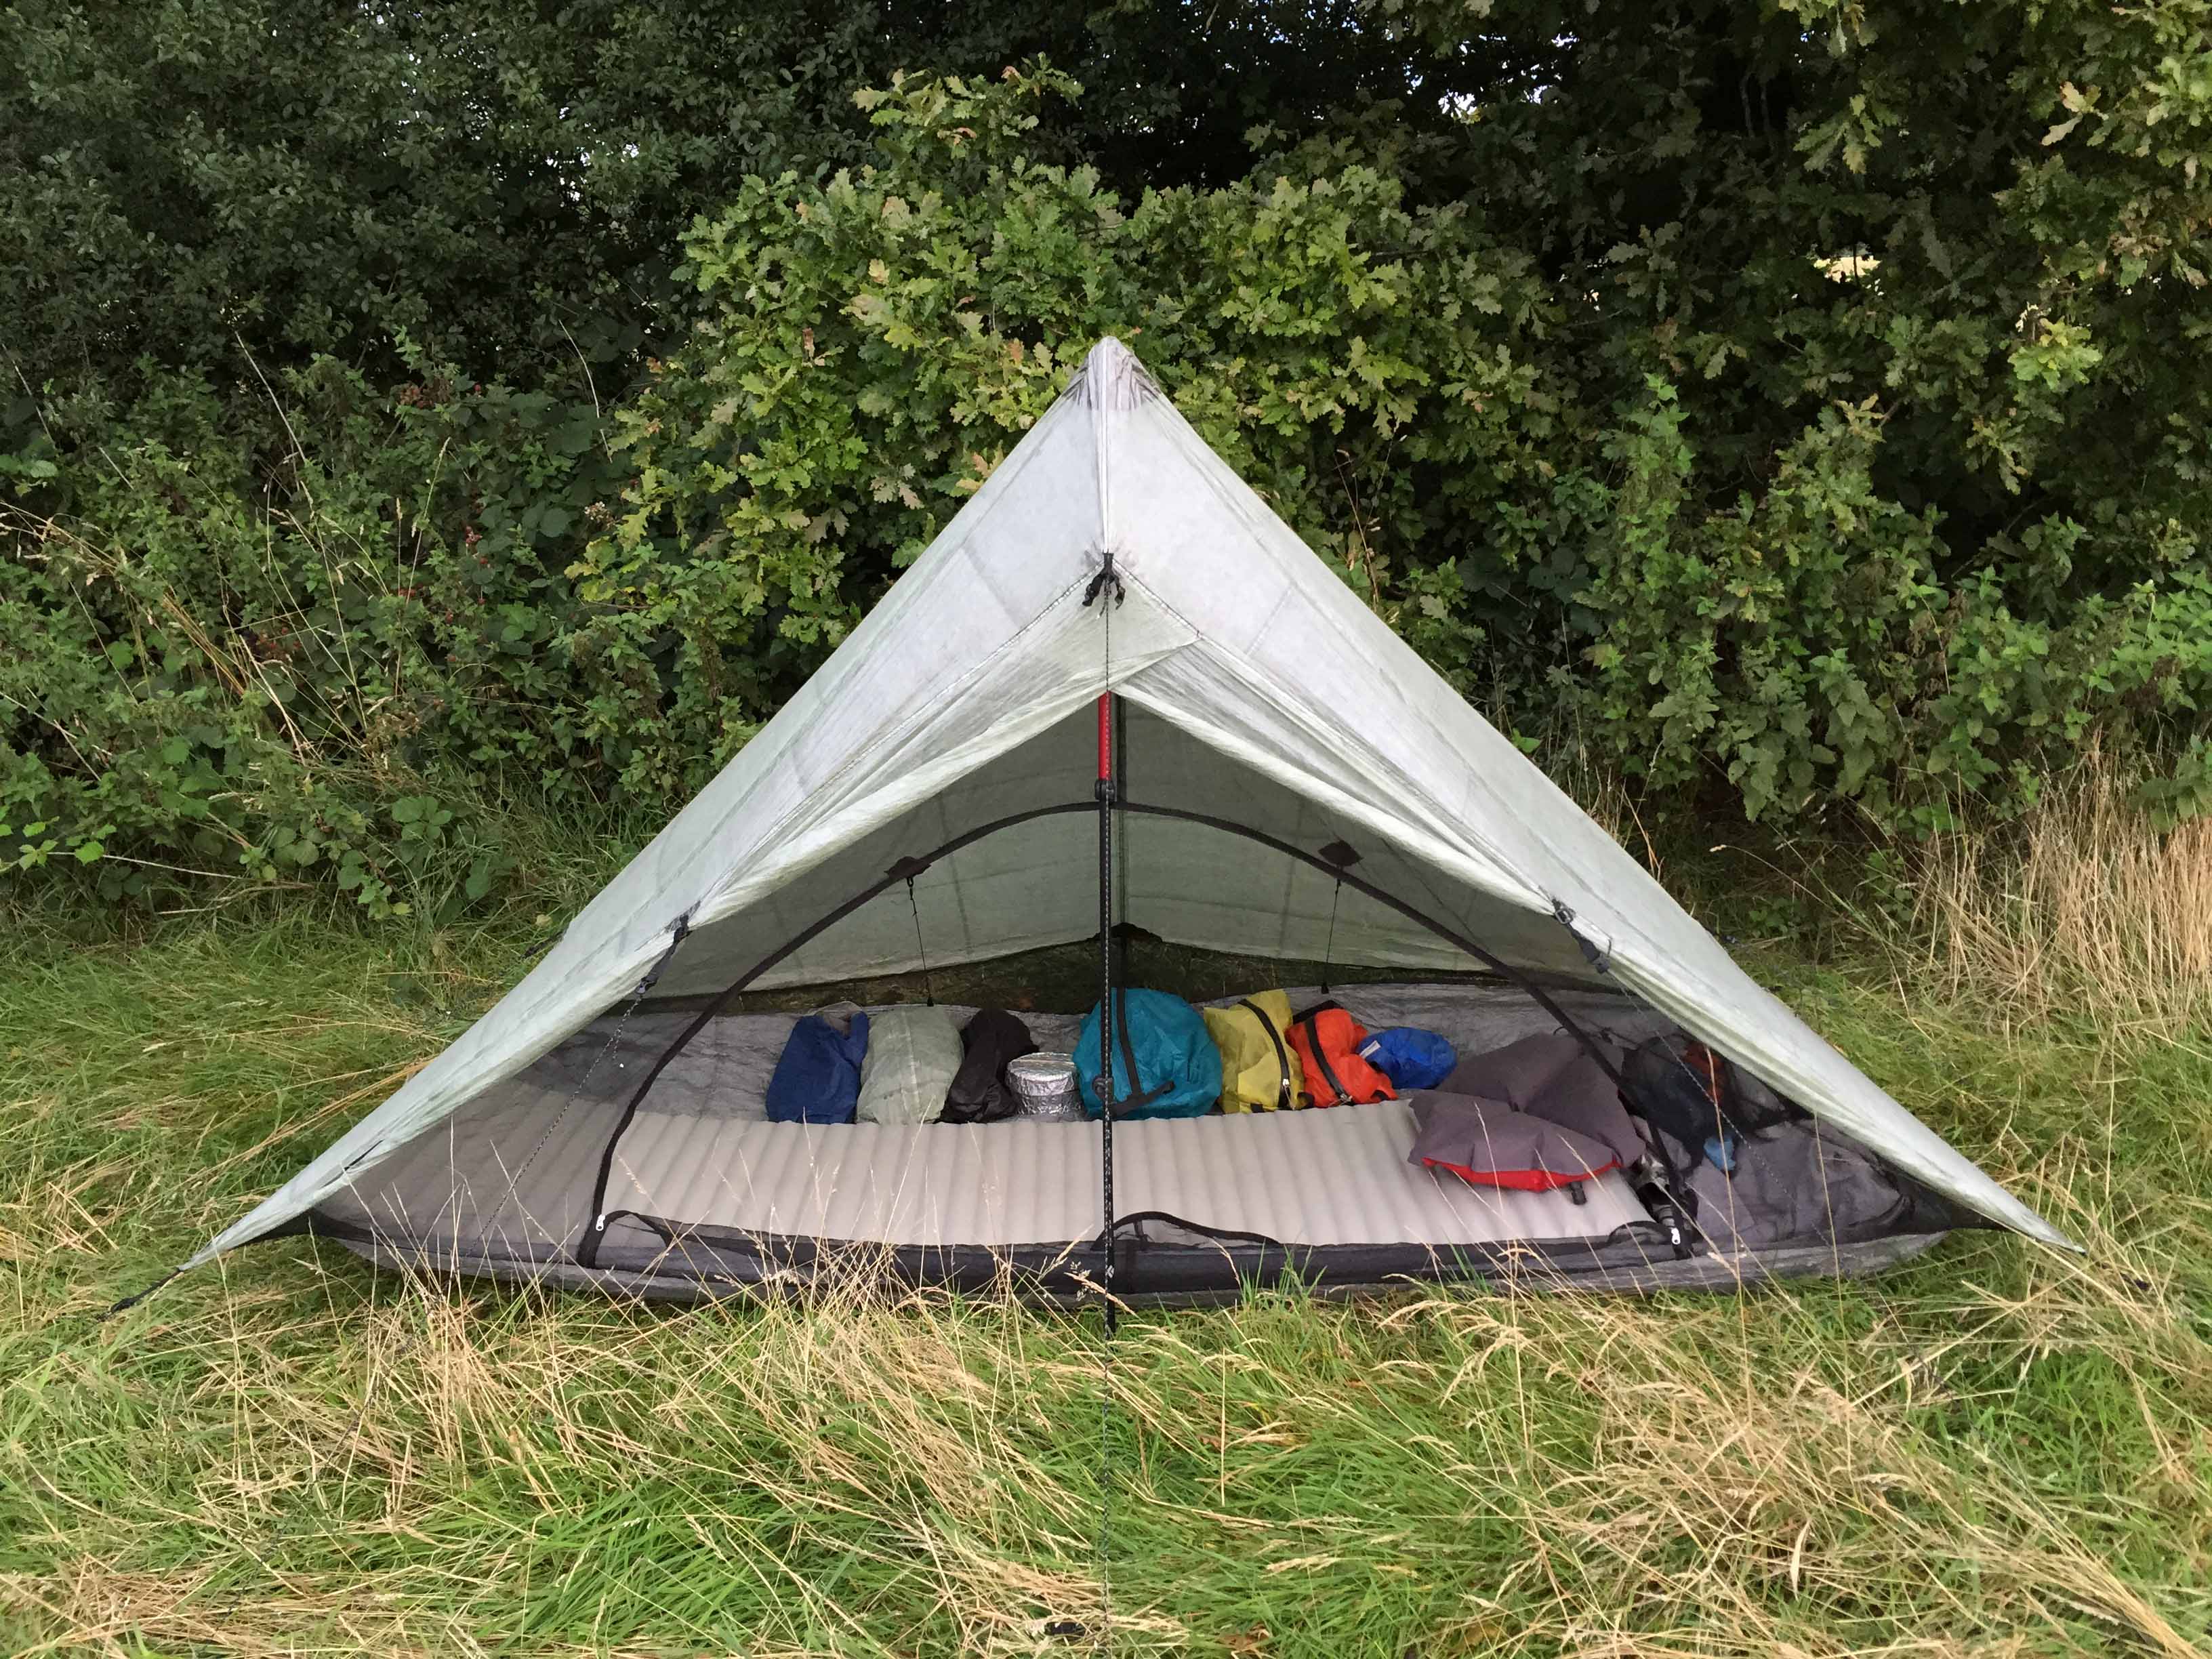 No Solvent Required - The ZPacks Altaplex Shelter Review